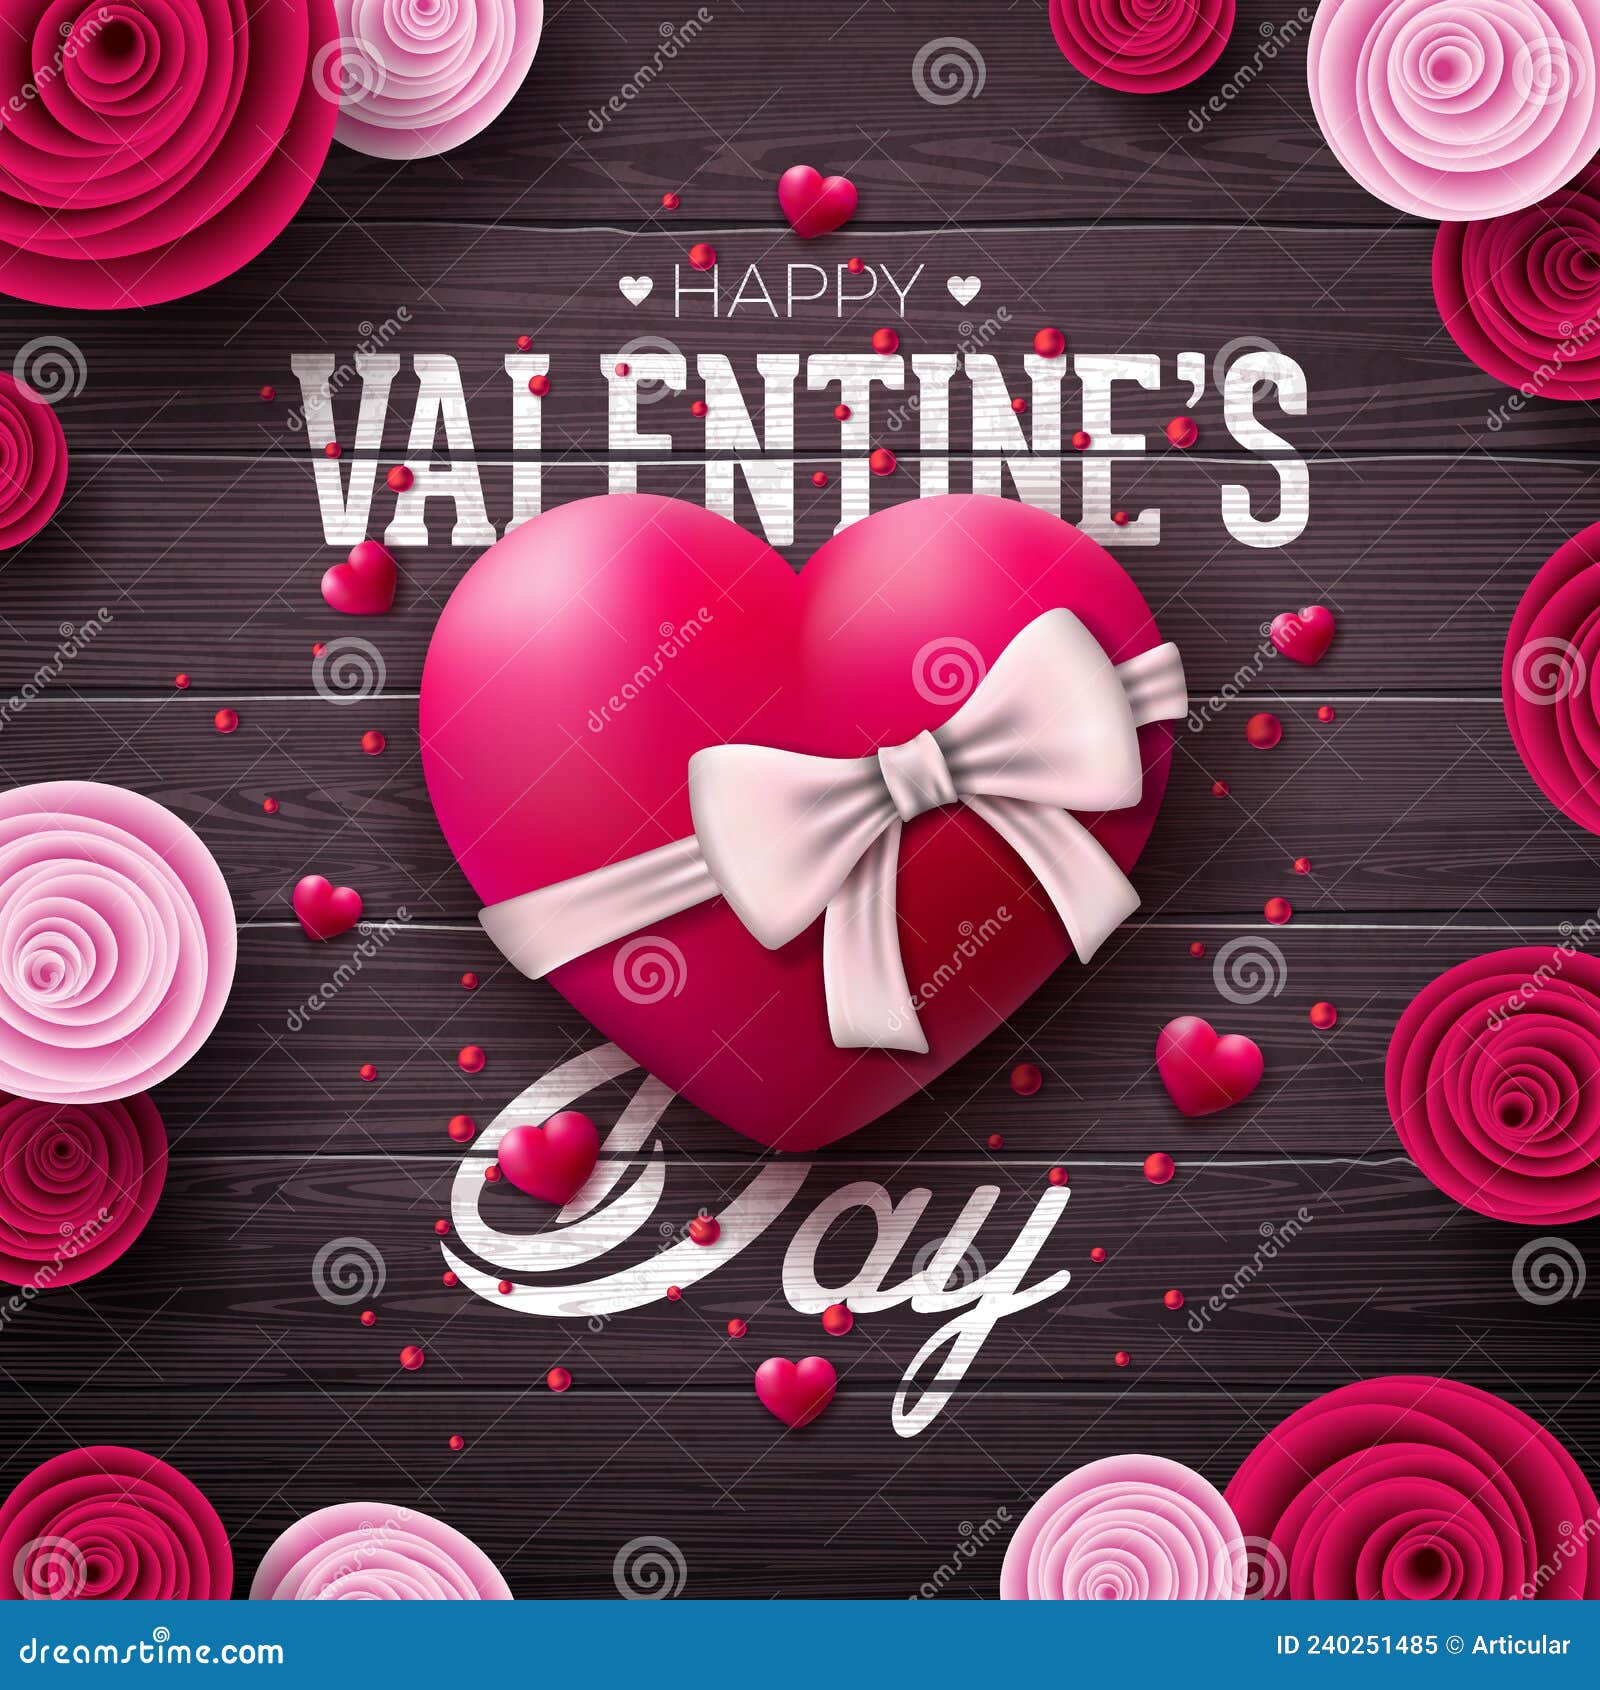 Happy valentines day red ribbon with typography Vector Image